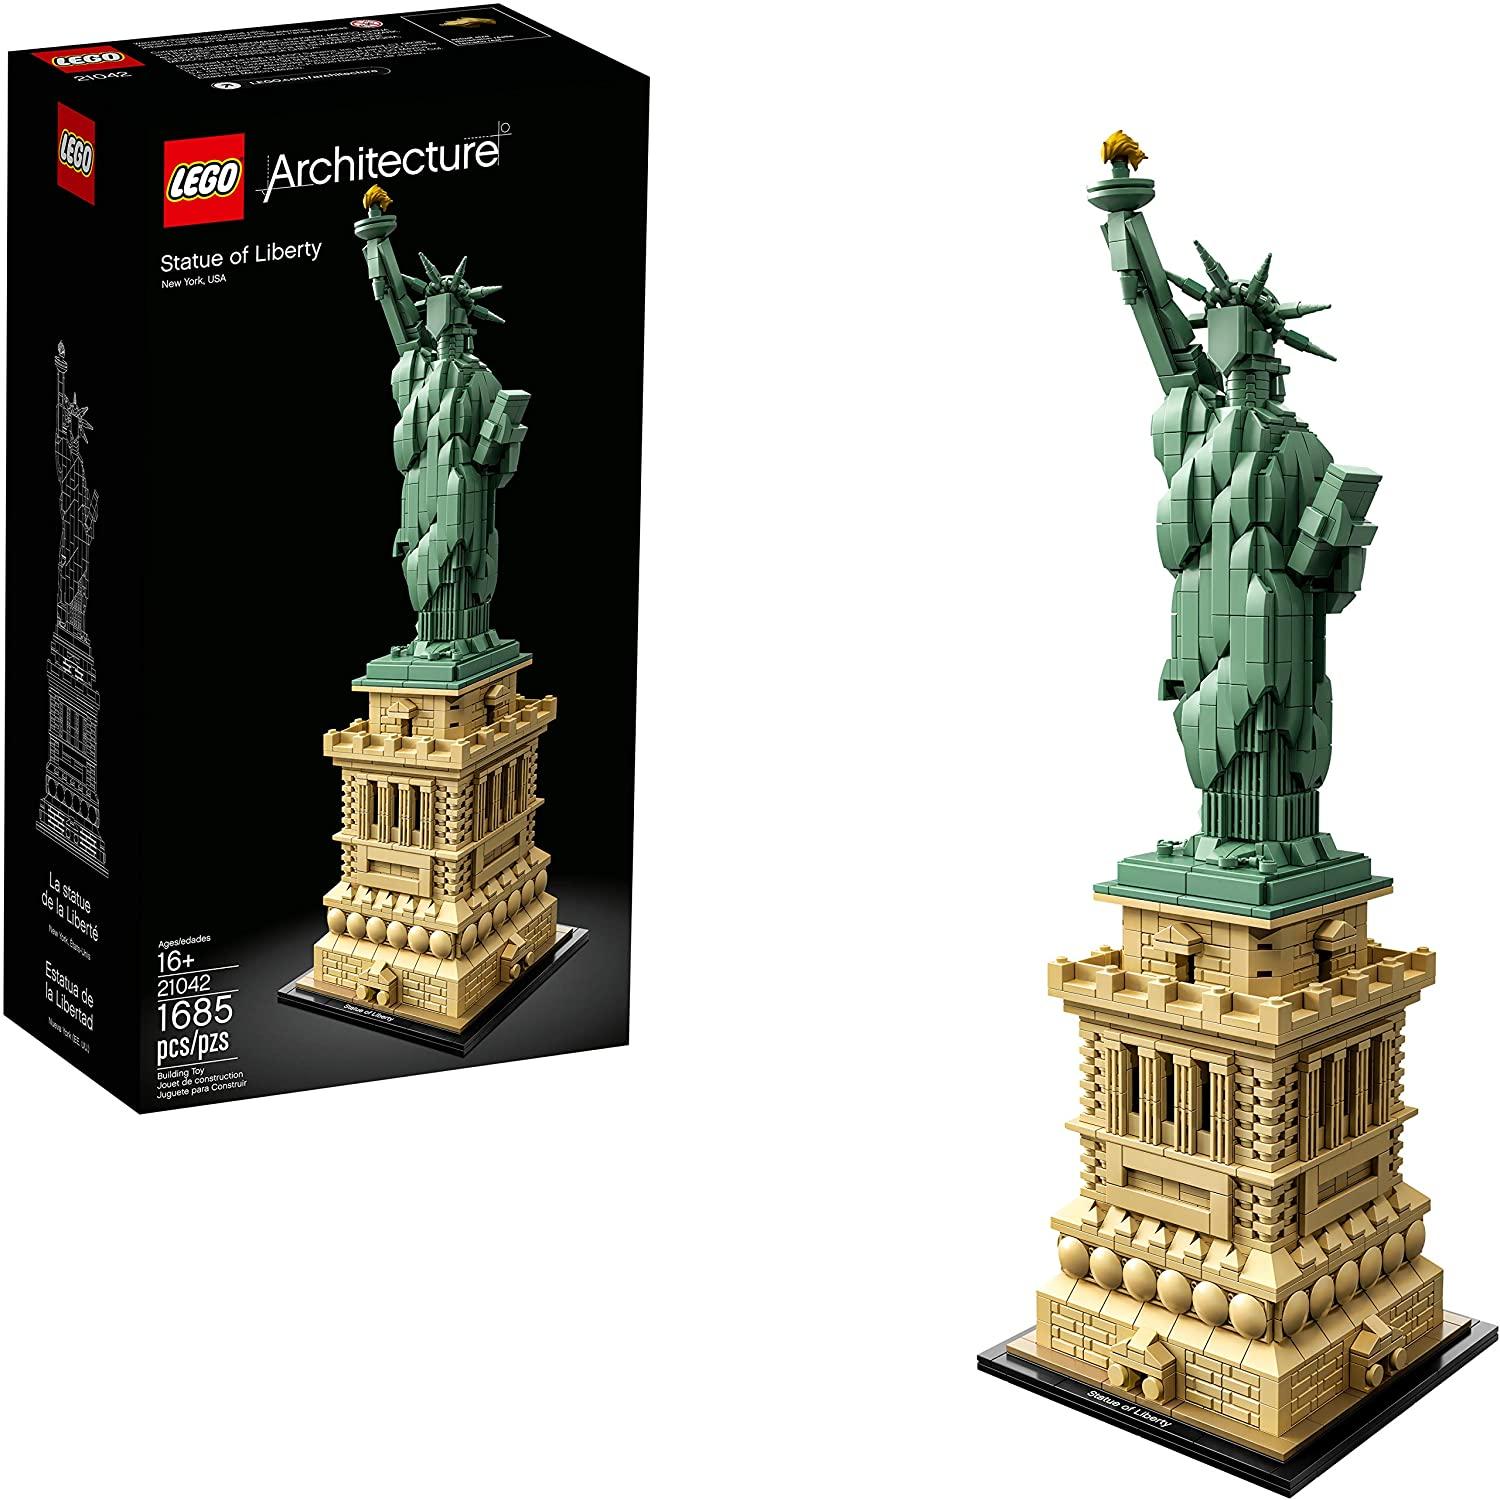 LEGO Architecture Statue of Liberty Building Kit for $97.45 Shipped